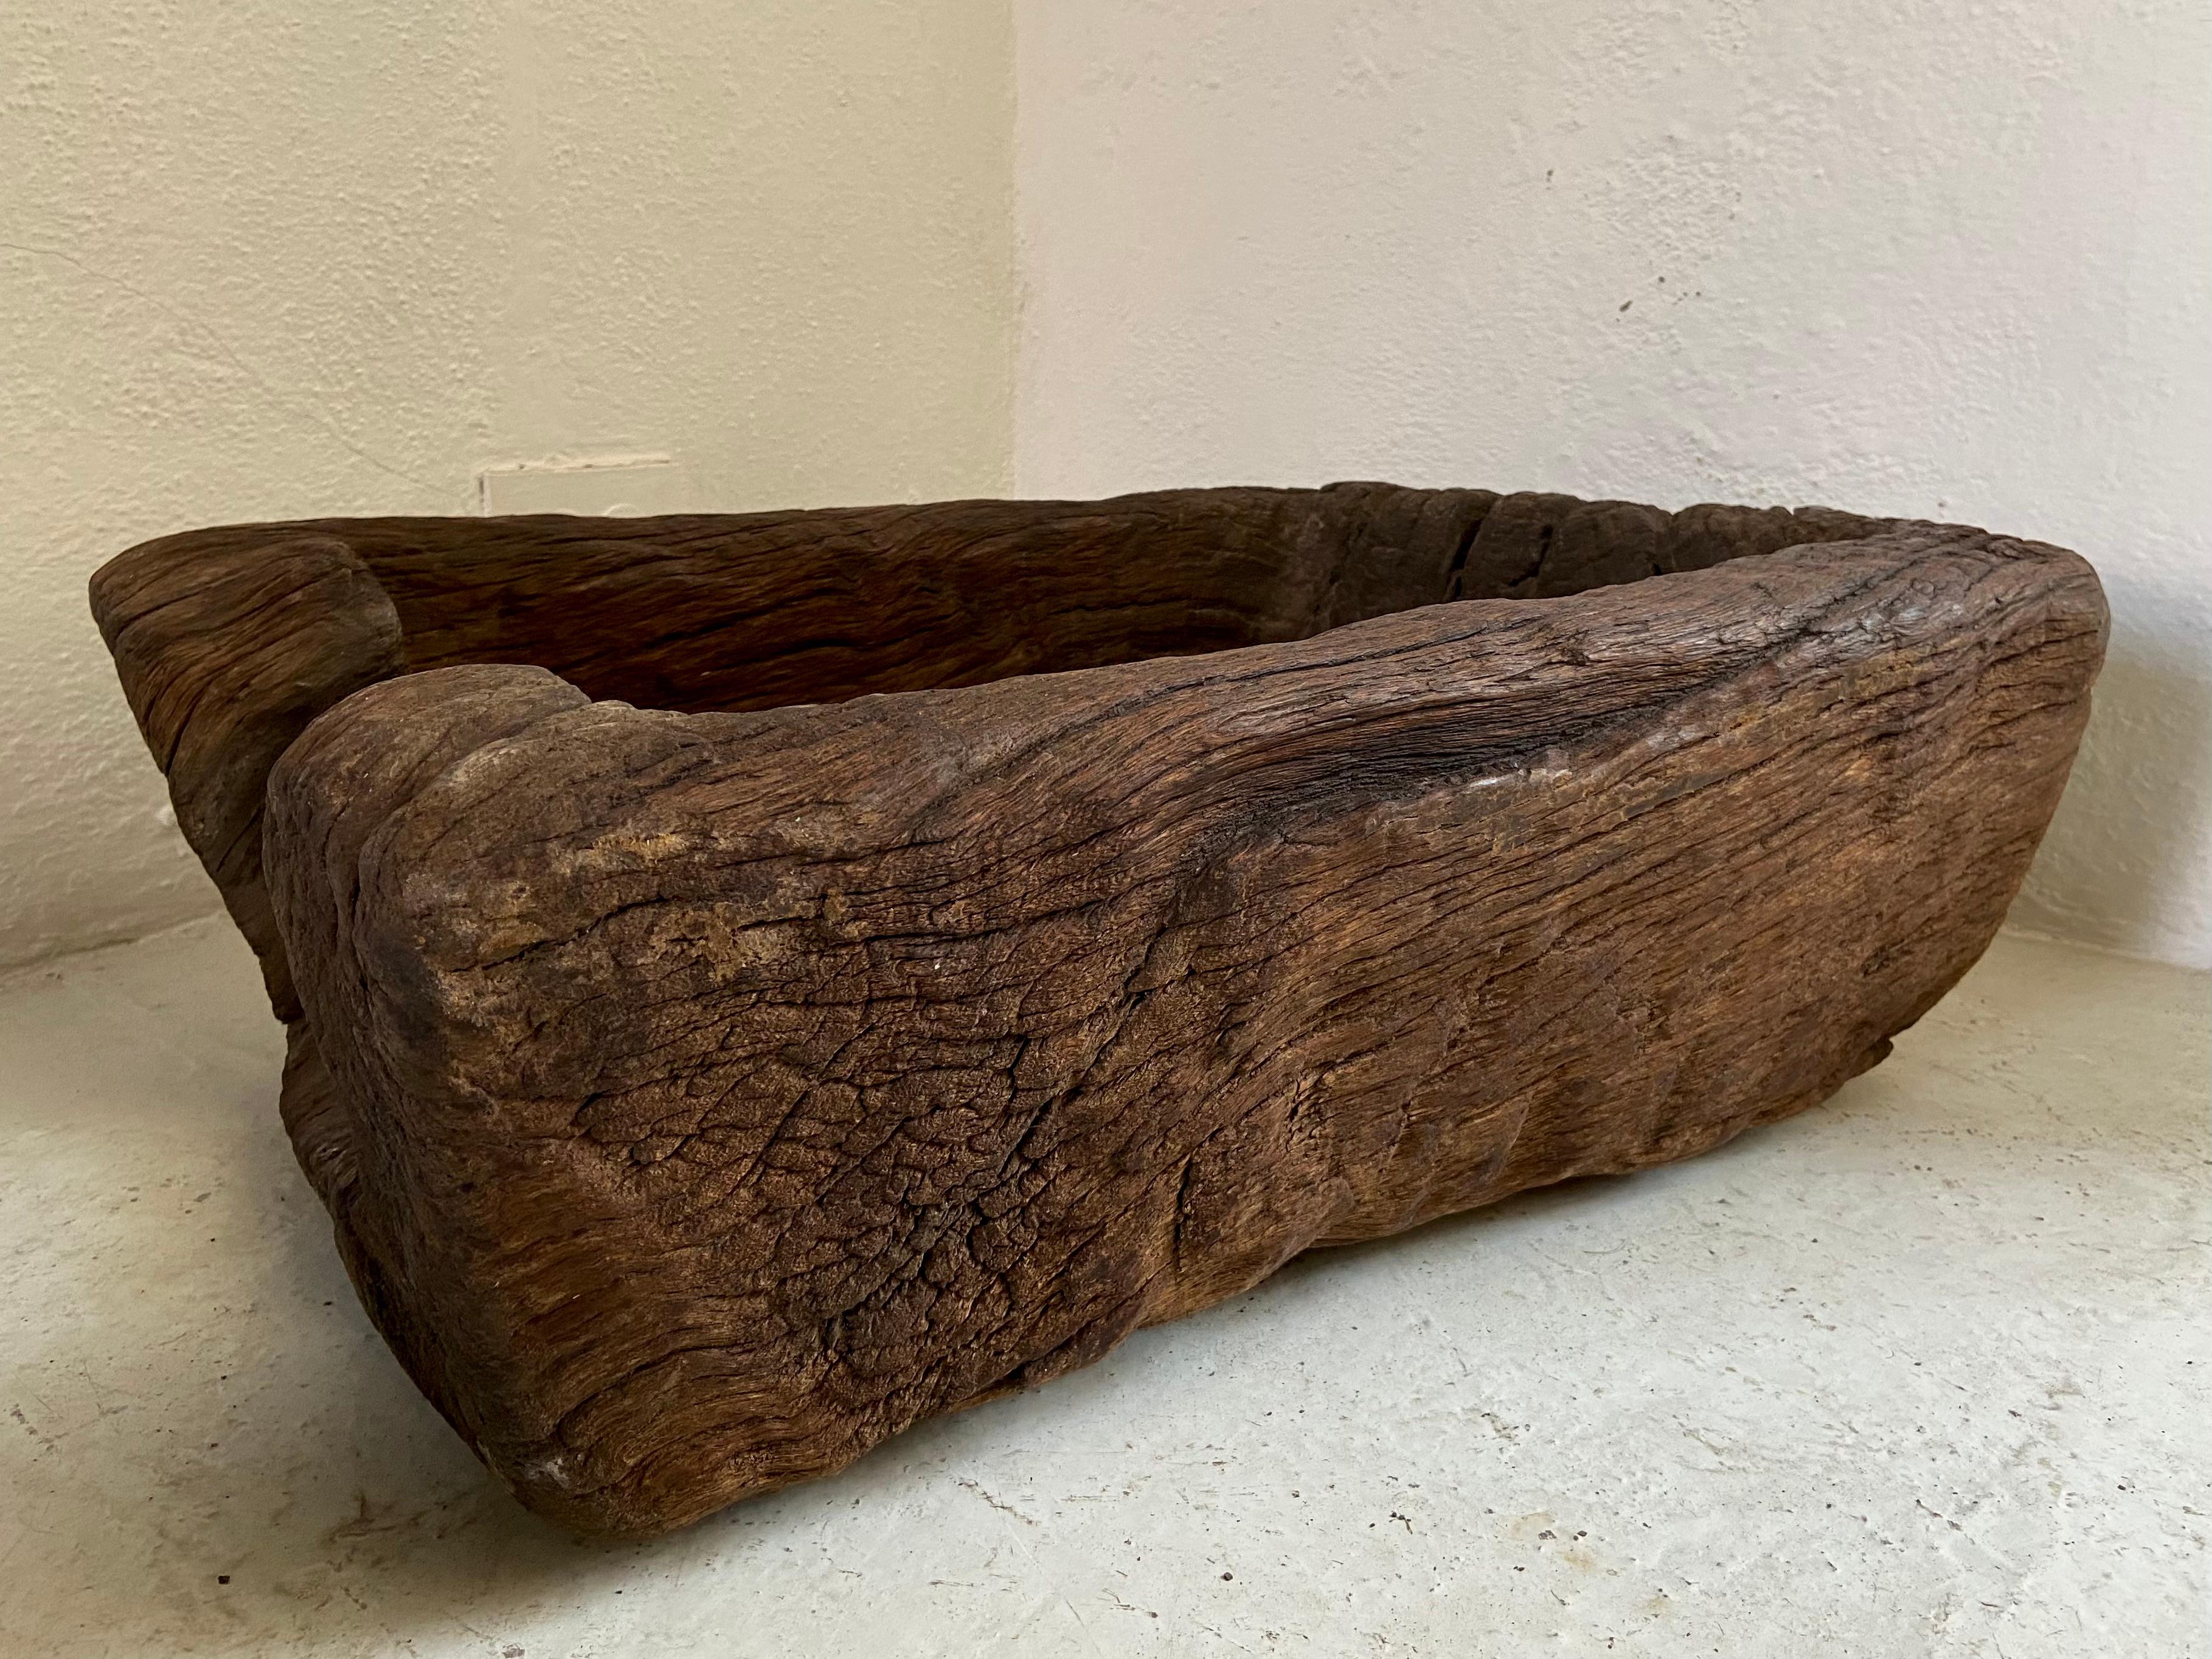 Rustic Hardwood Wash Basin Trough from Mexico, Circa Late 19th Century